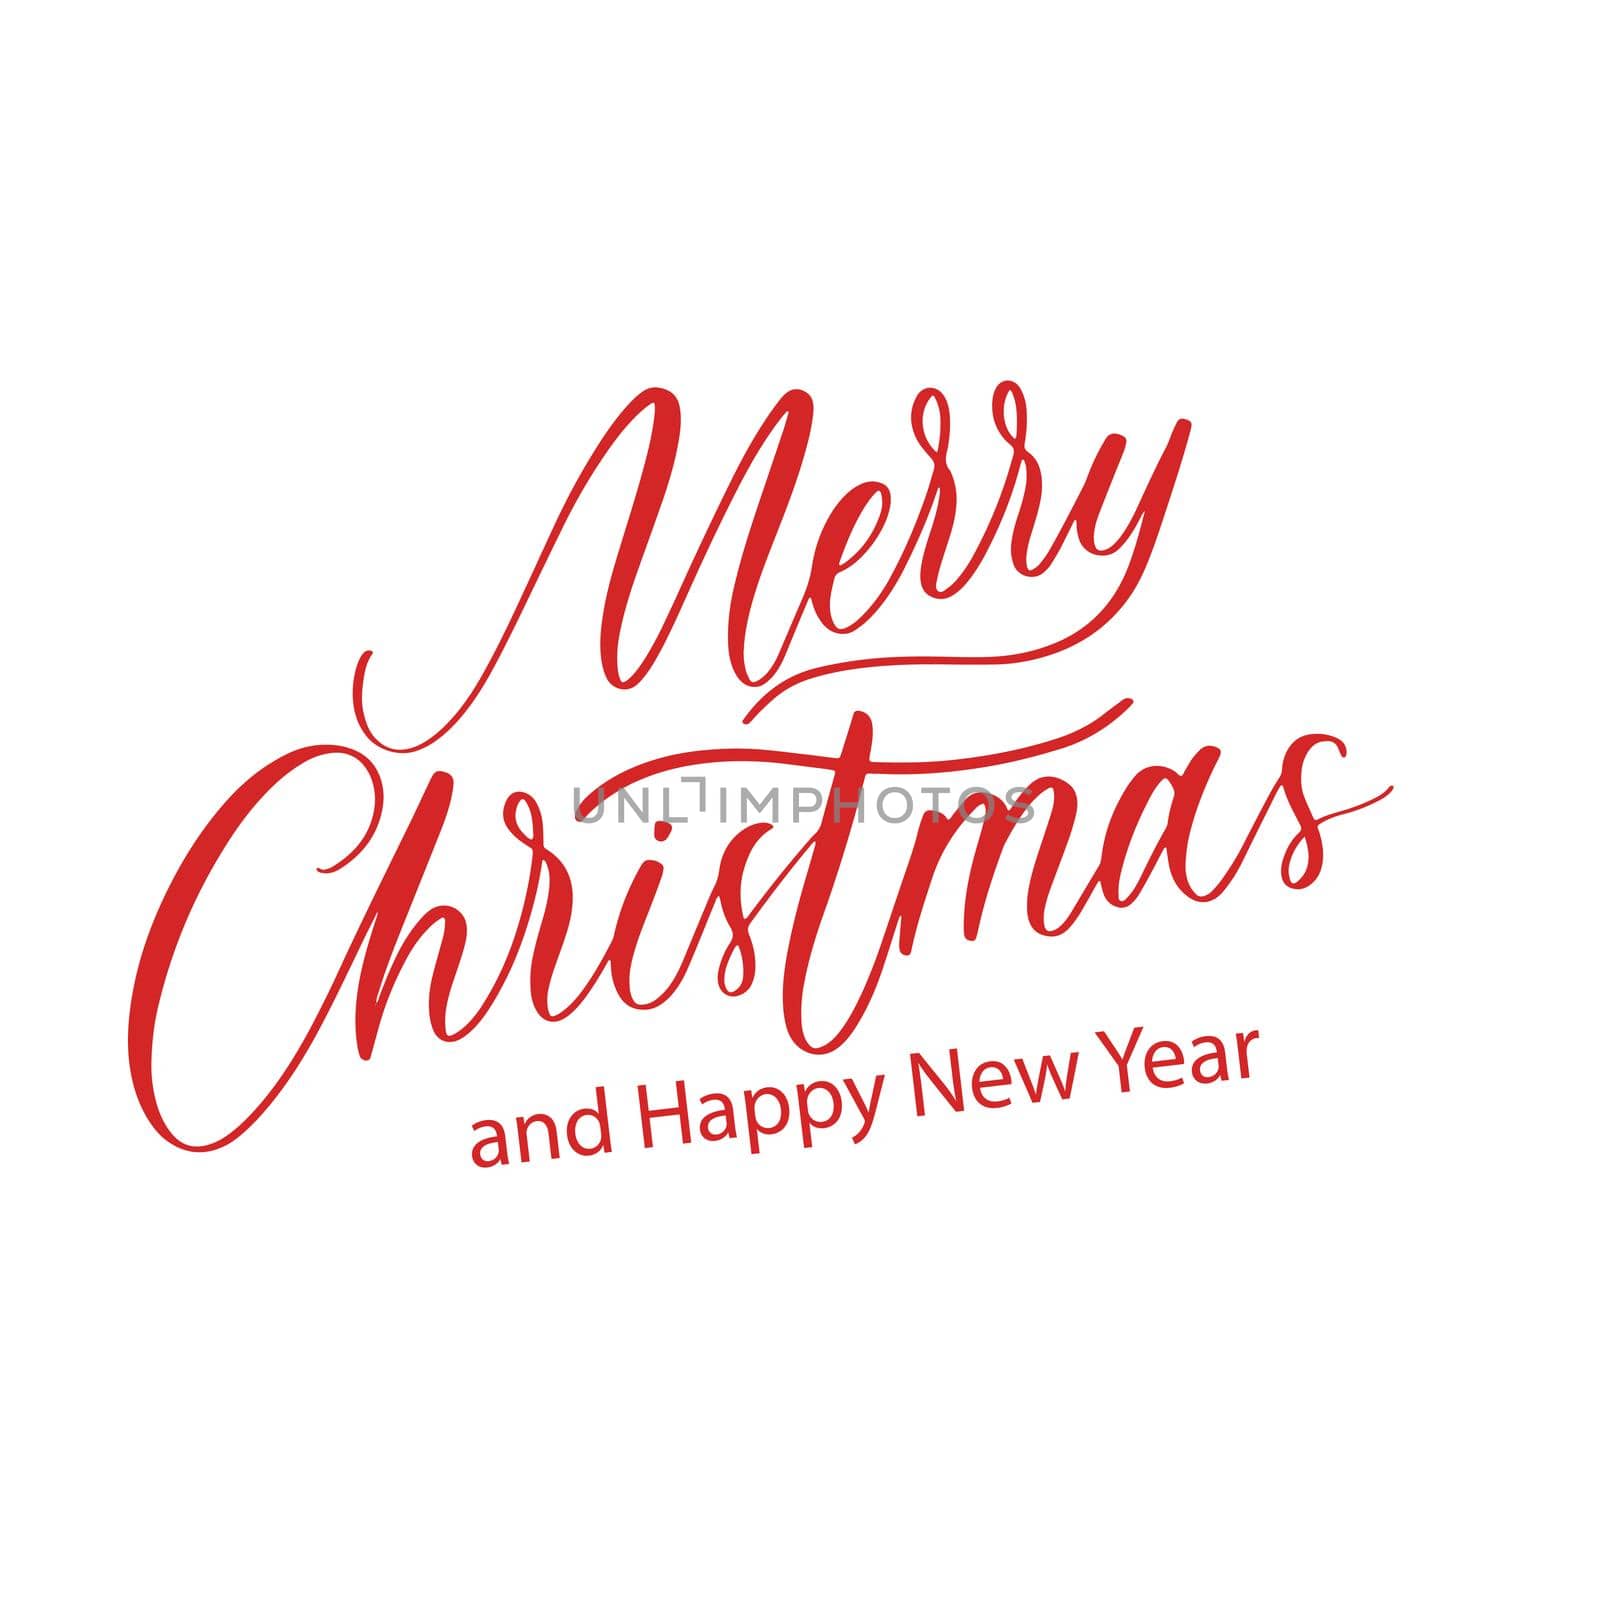 Merry Christmas handwritten red text on white background